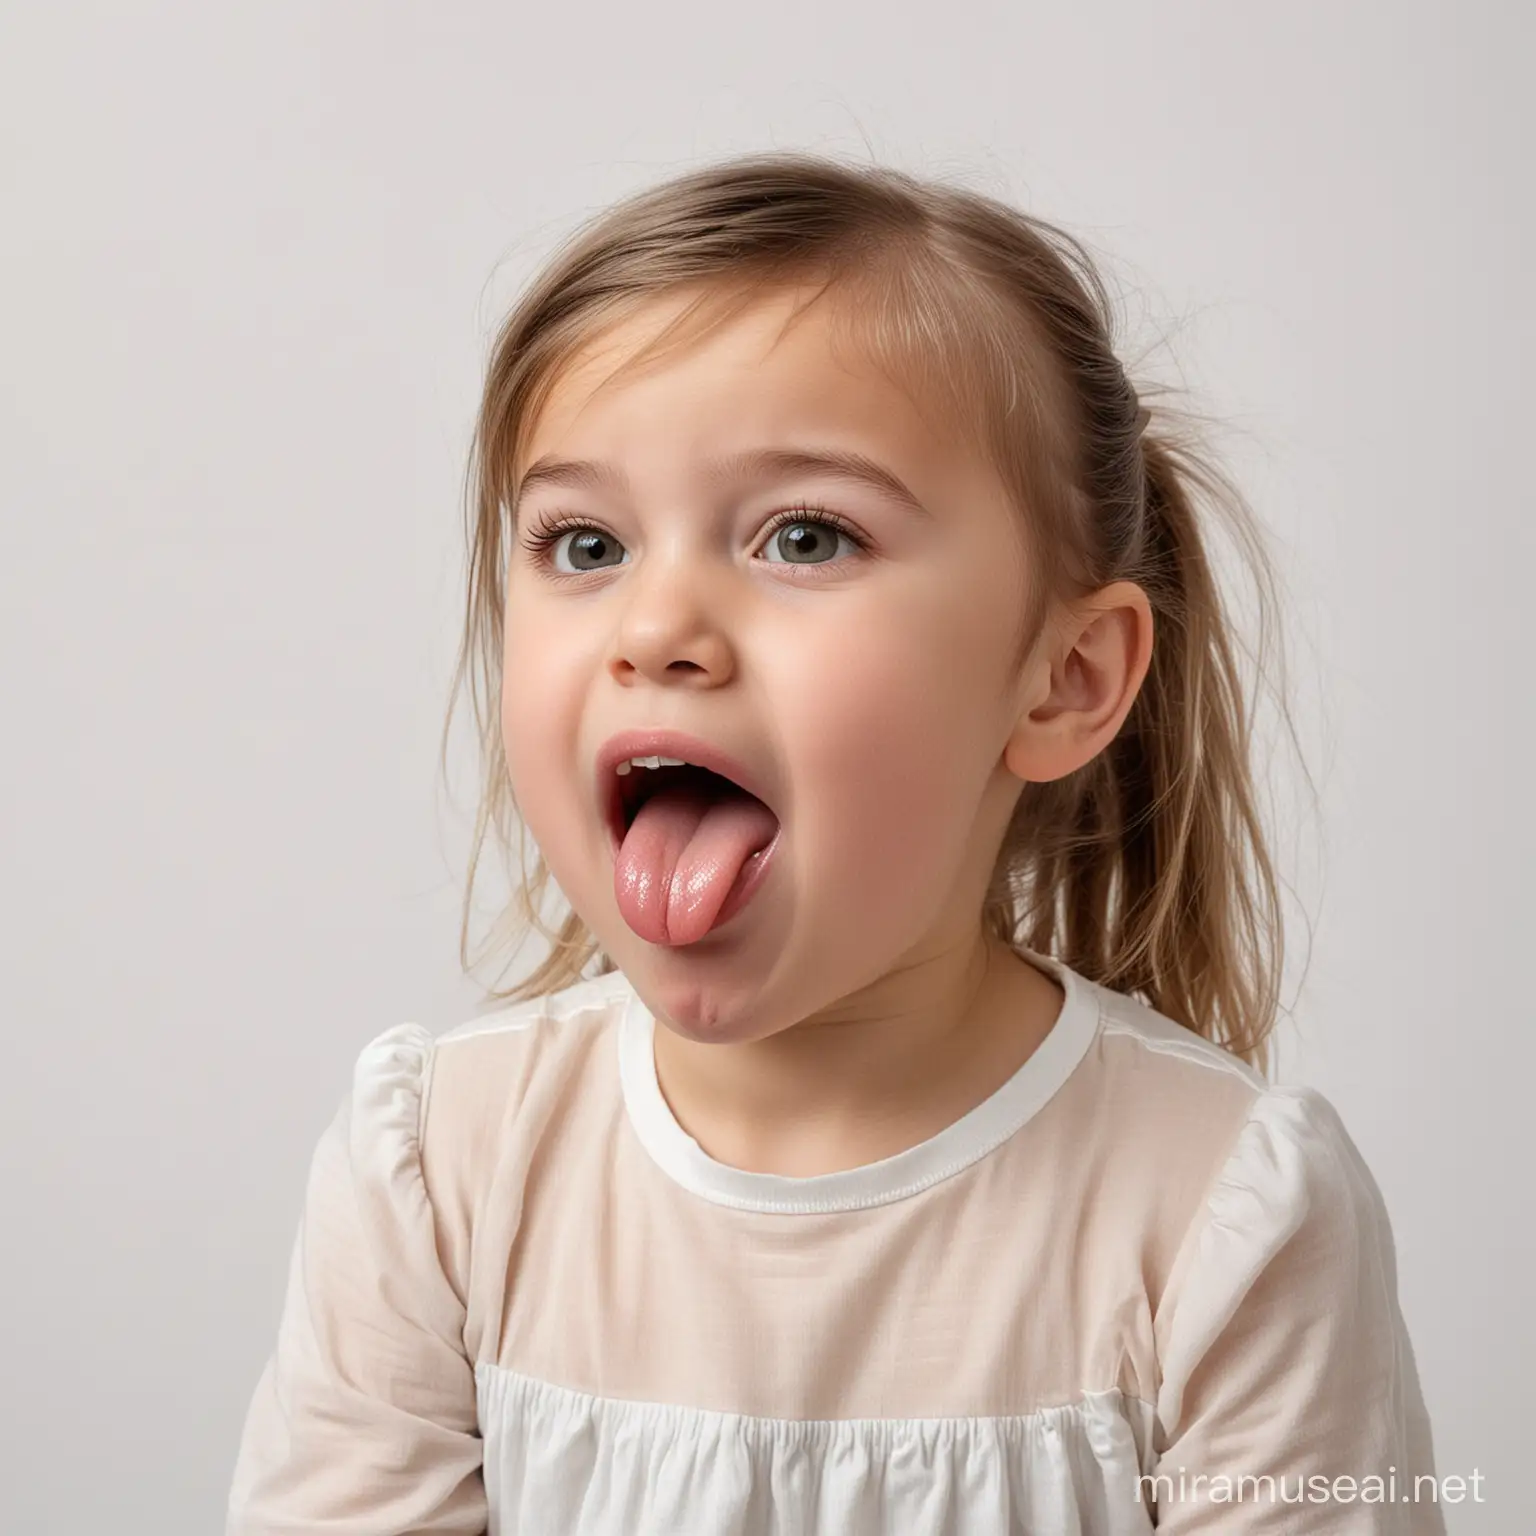 A little girl sitting and sticking her tongue out while drooling, seen in profile , white background.